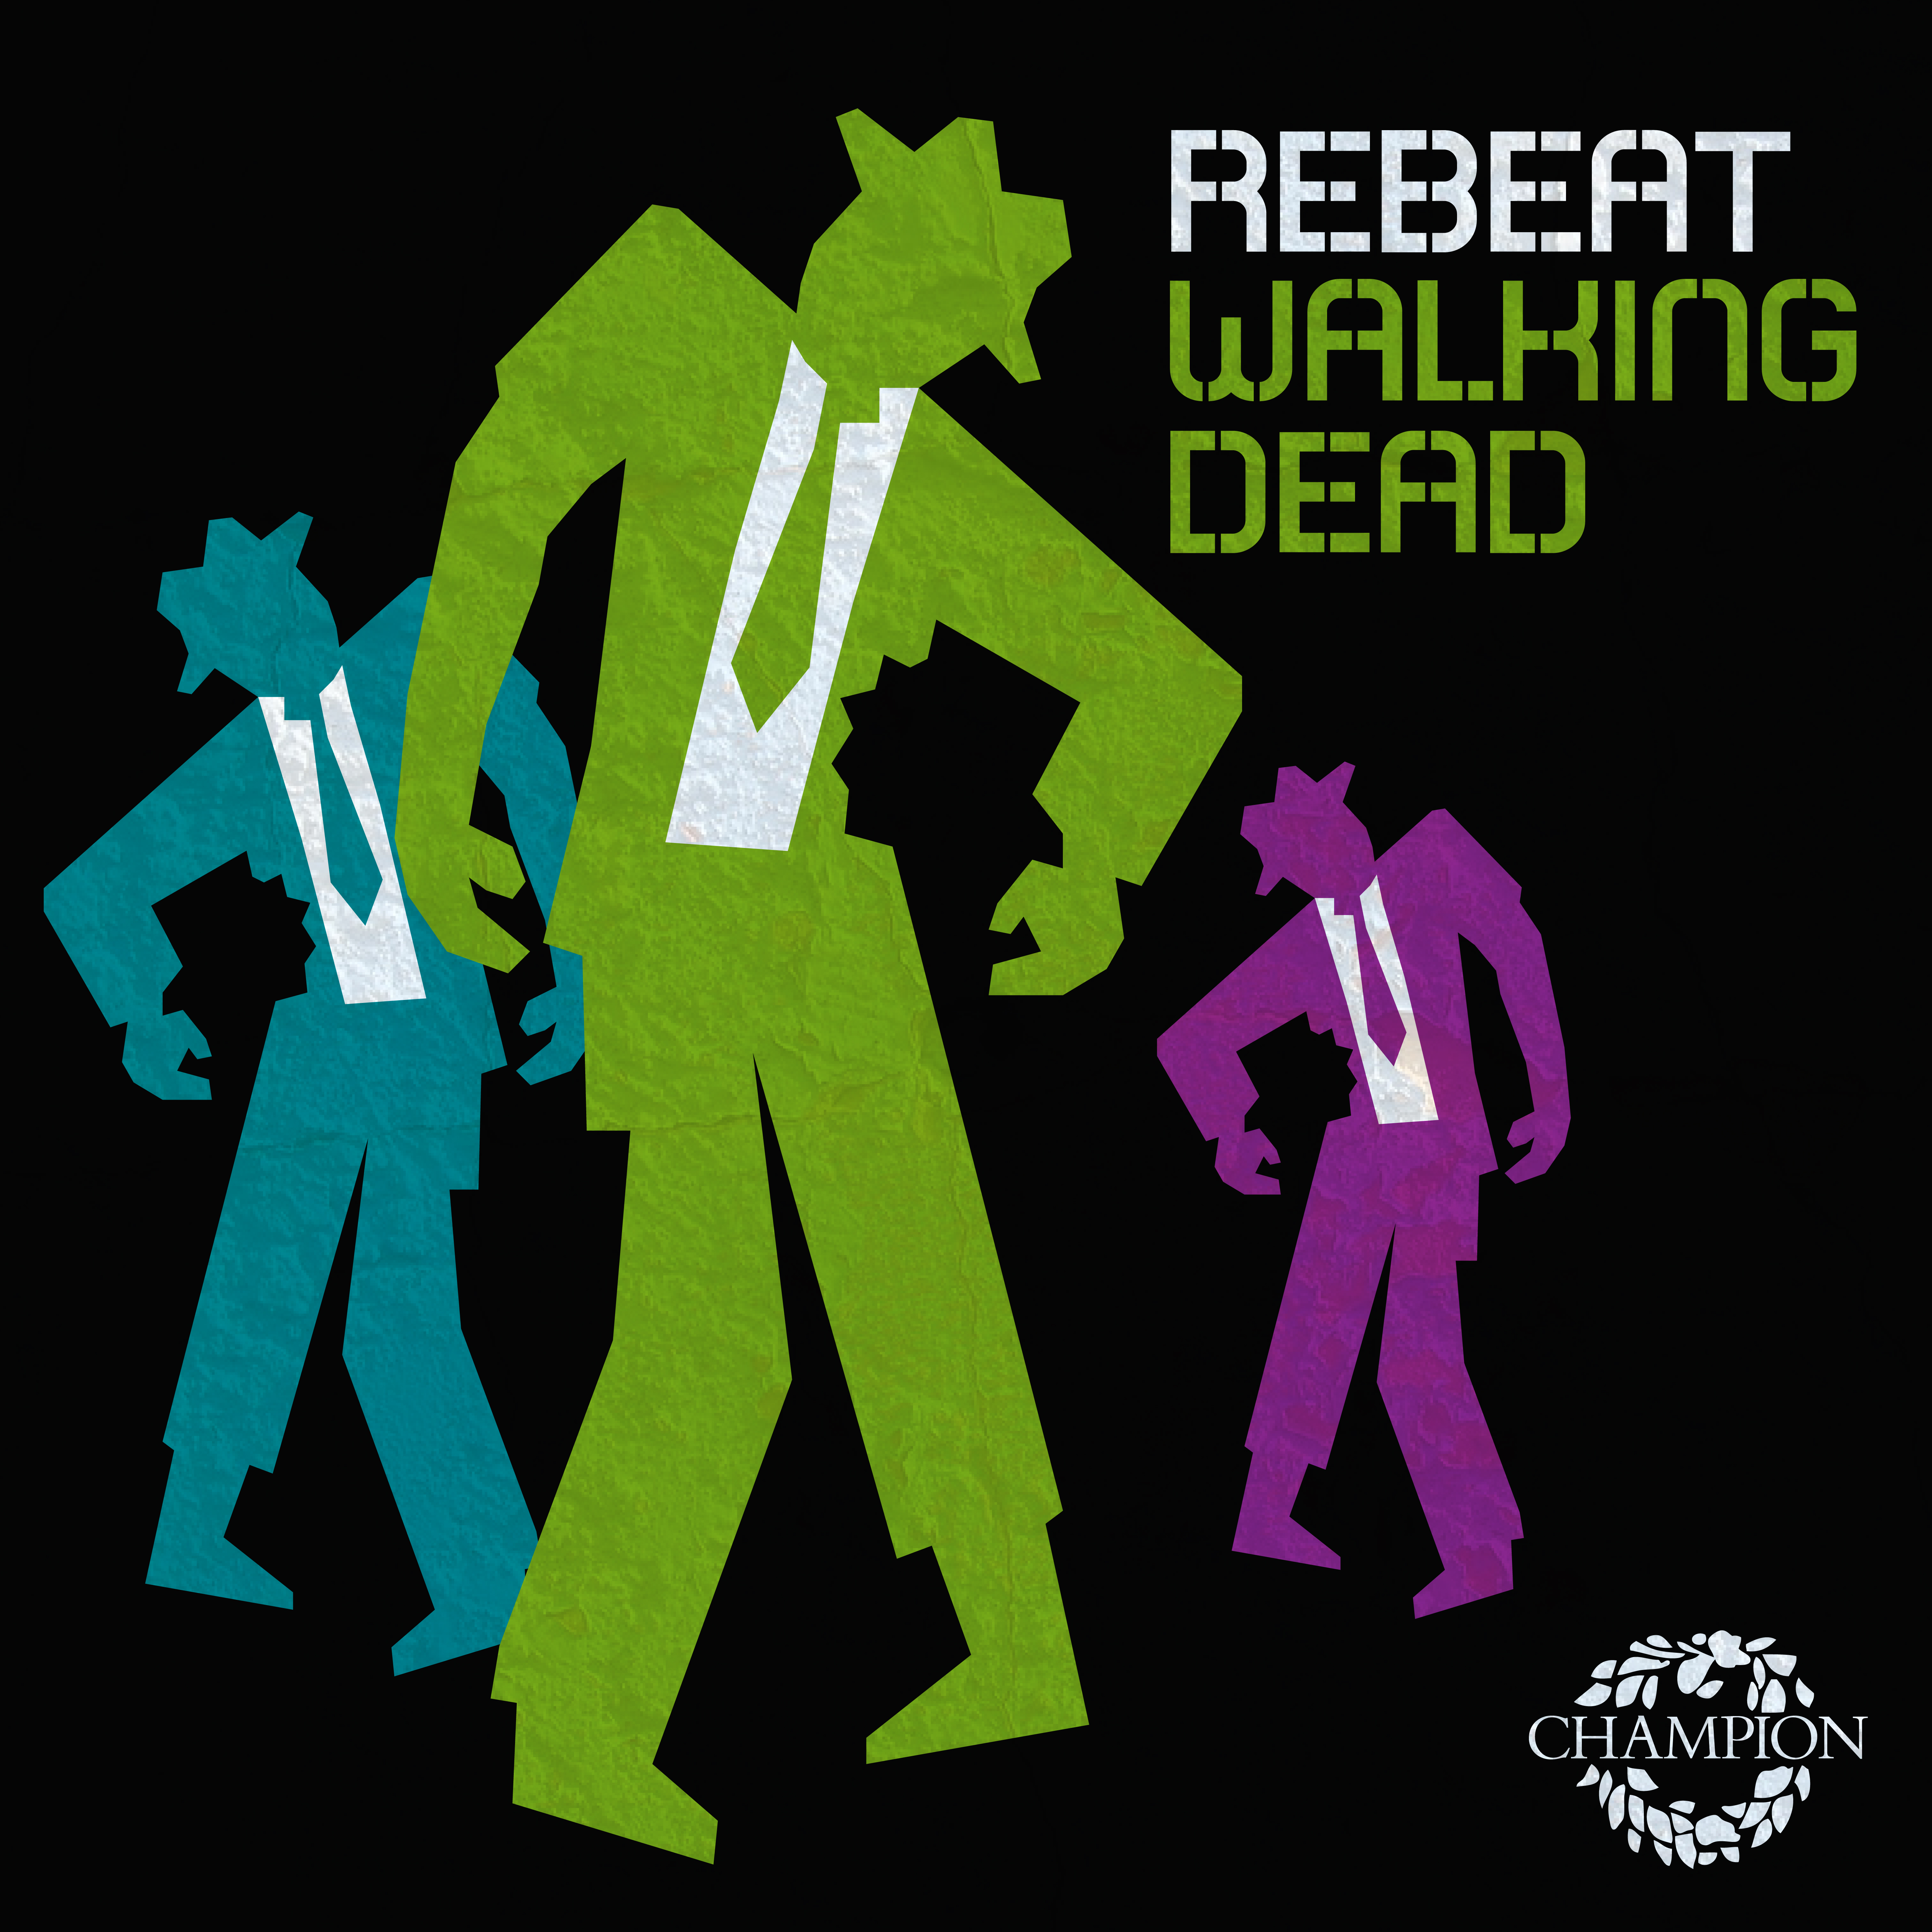 REBEAT WALKING DEAD Released 10th August on Champion Records